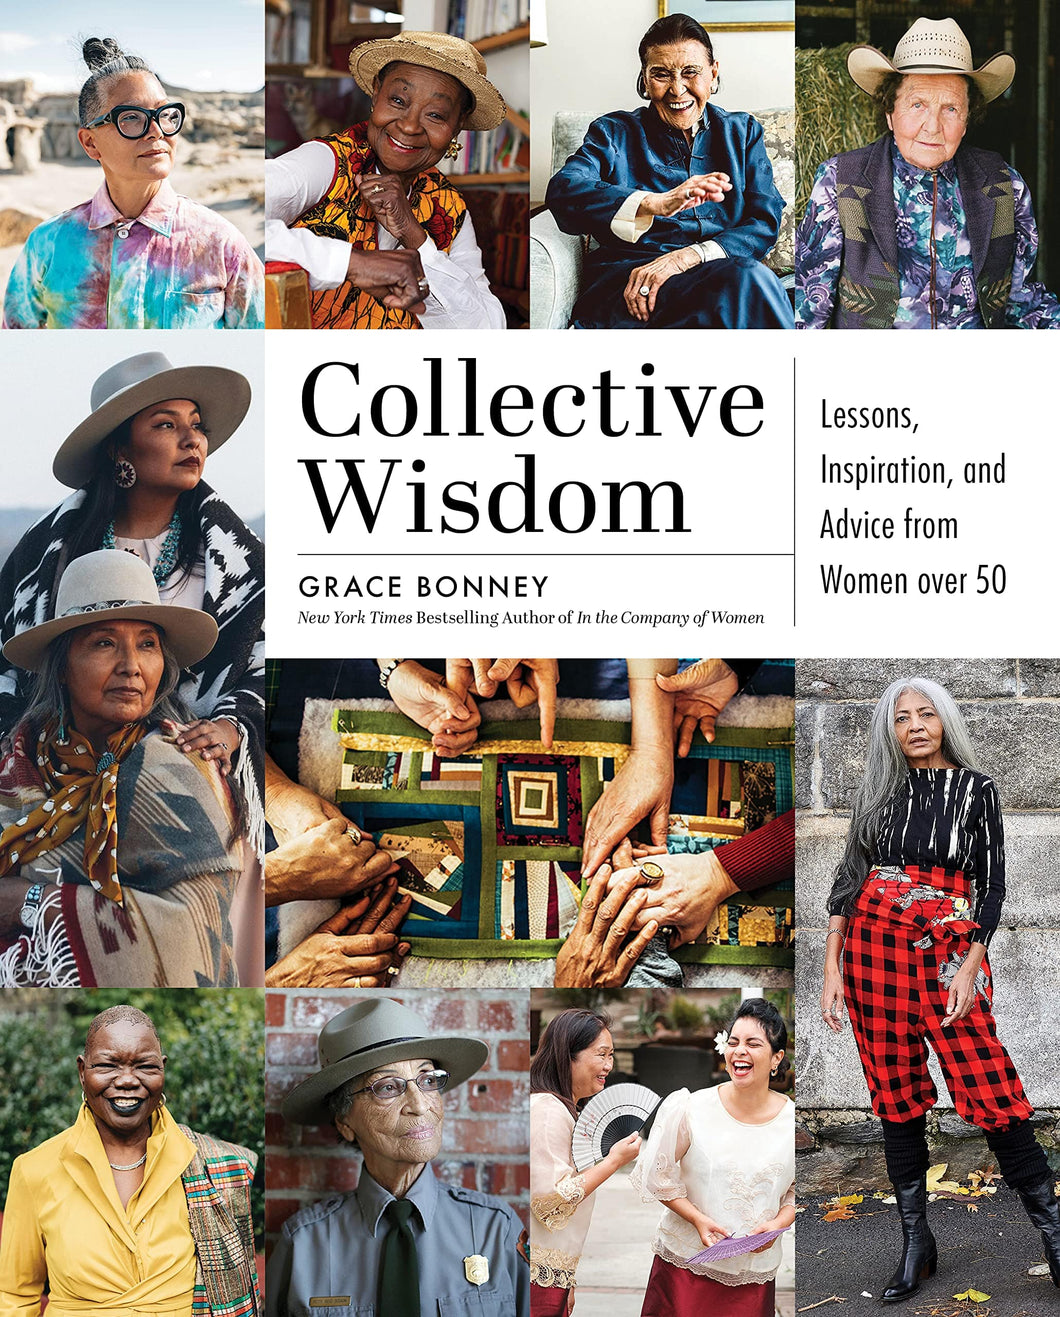 Collective Wisdom Lessons, Inspiration, and Advice from Women over 50 by Grace Bonney